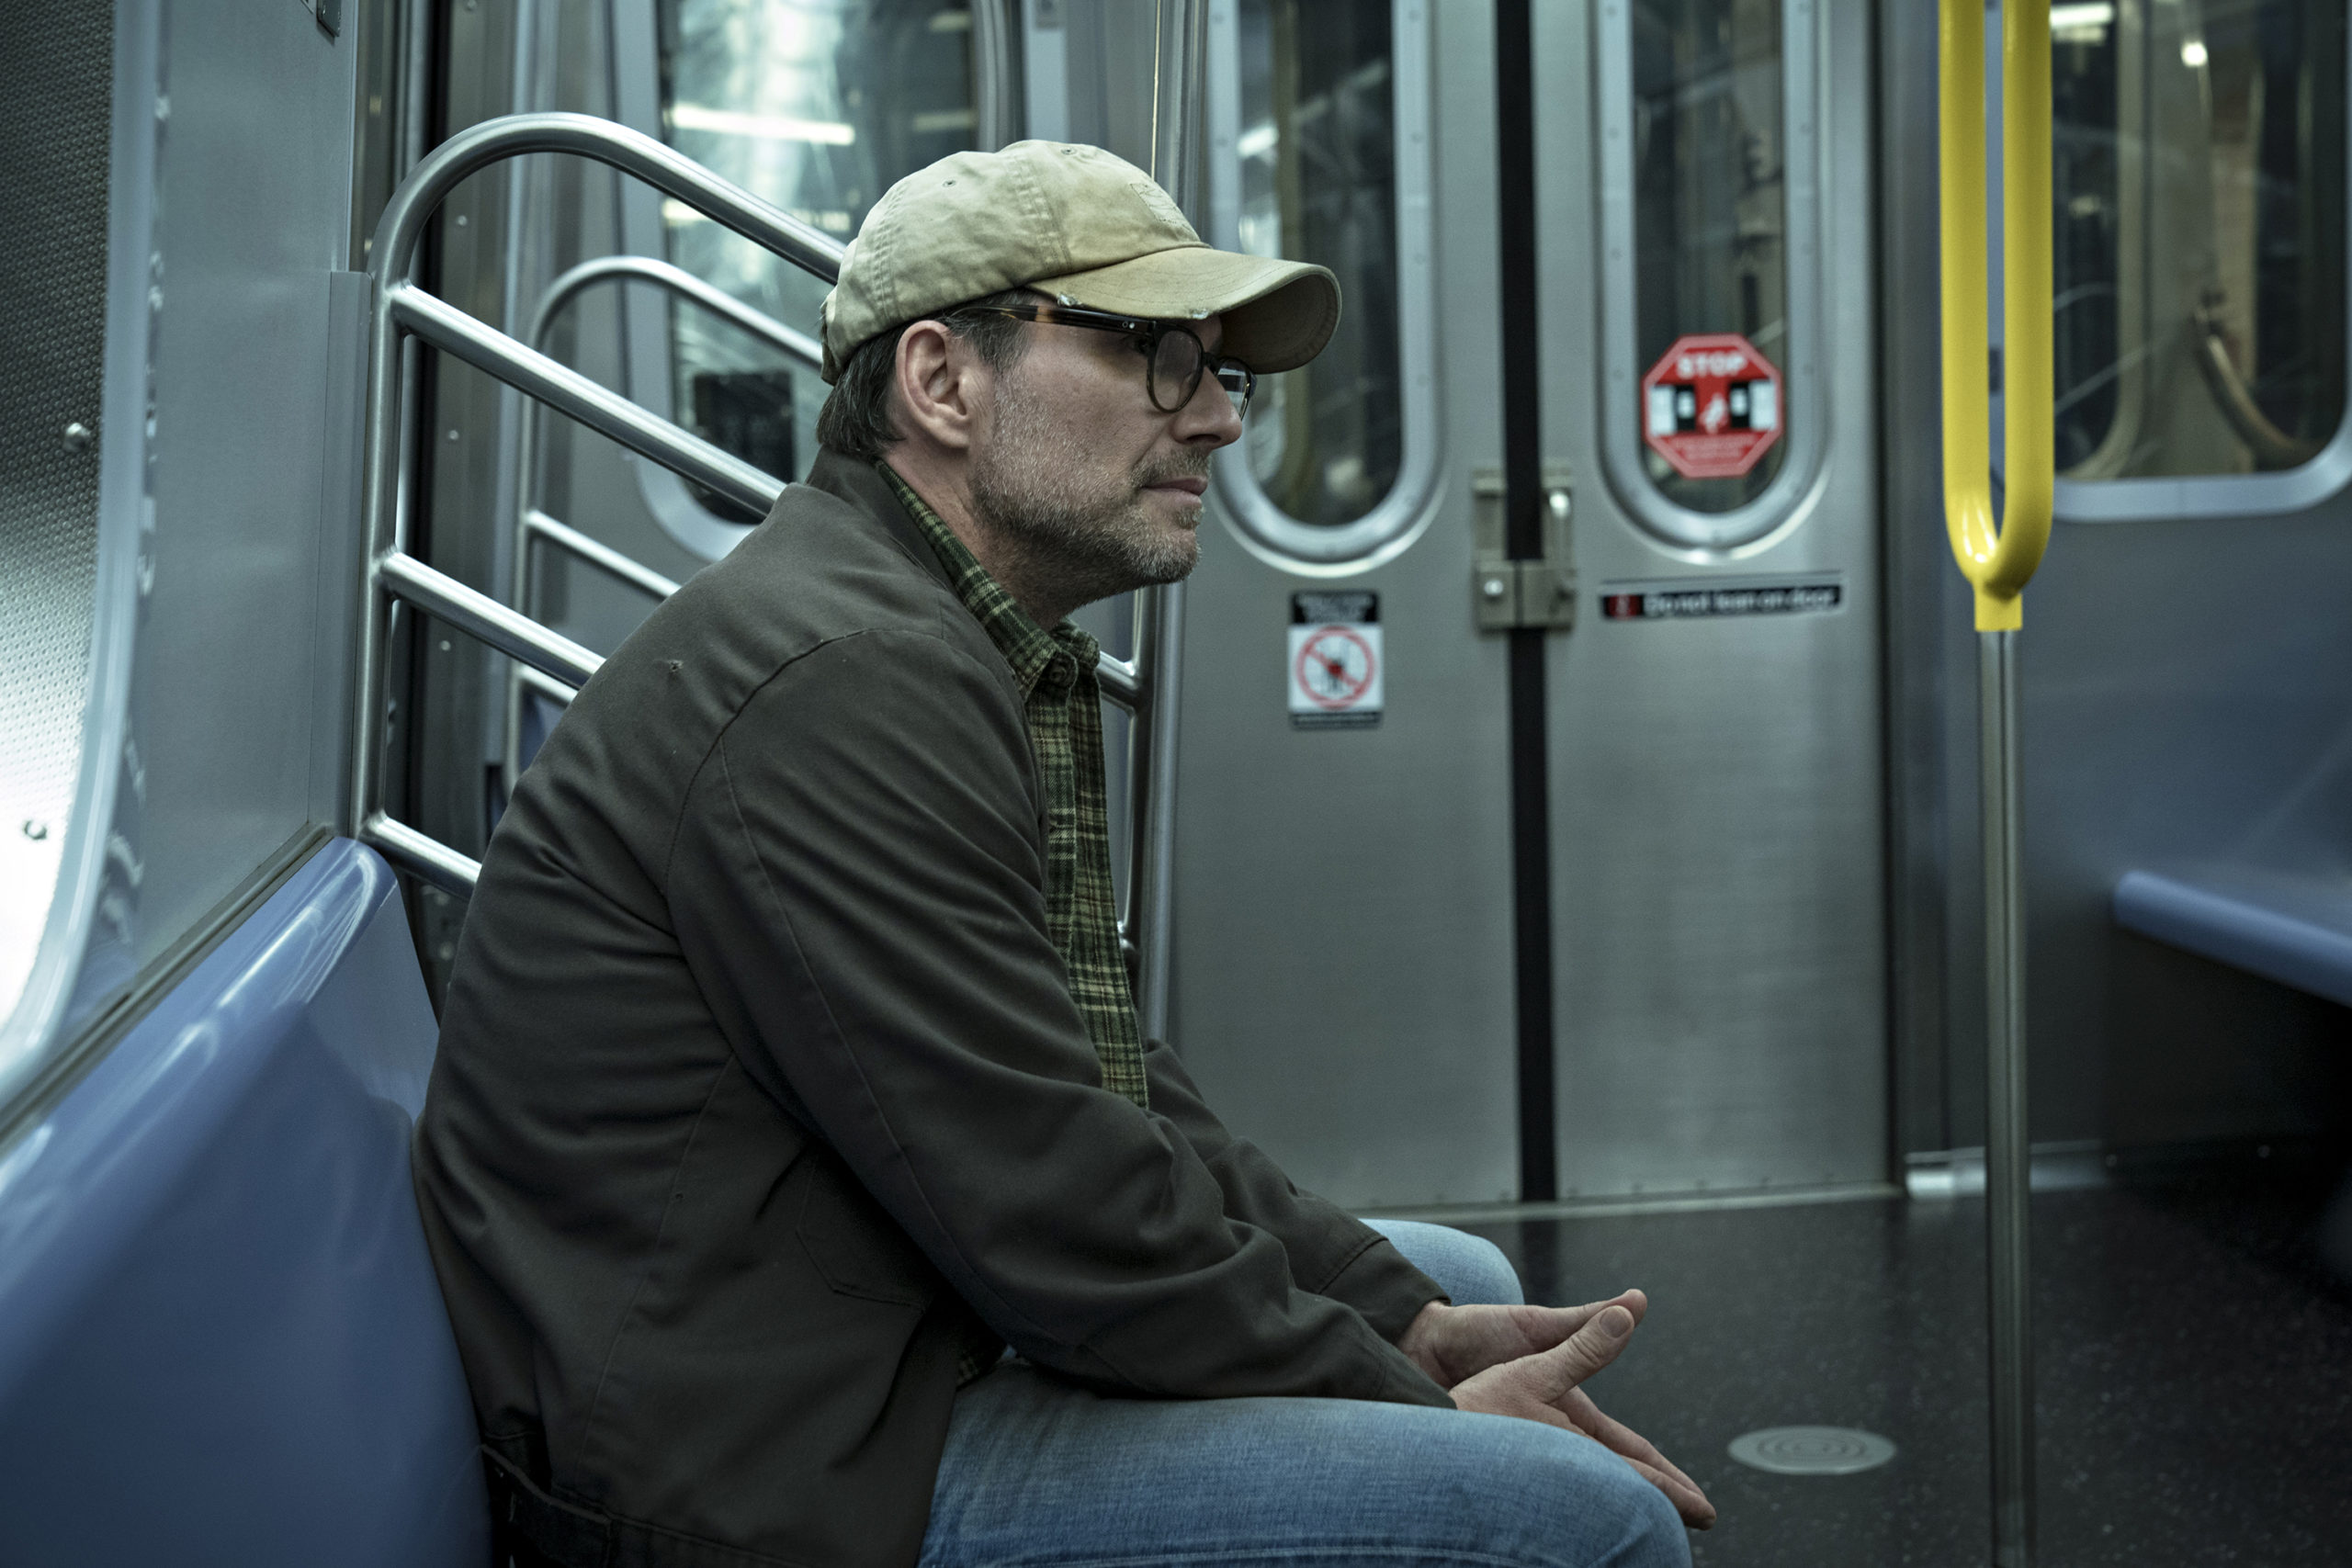 How the Mr. Robot Finale Echoed the Virginia Shooting